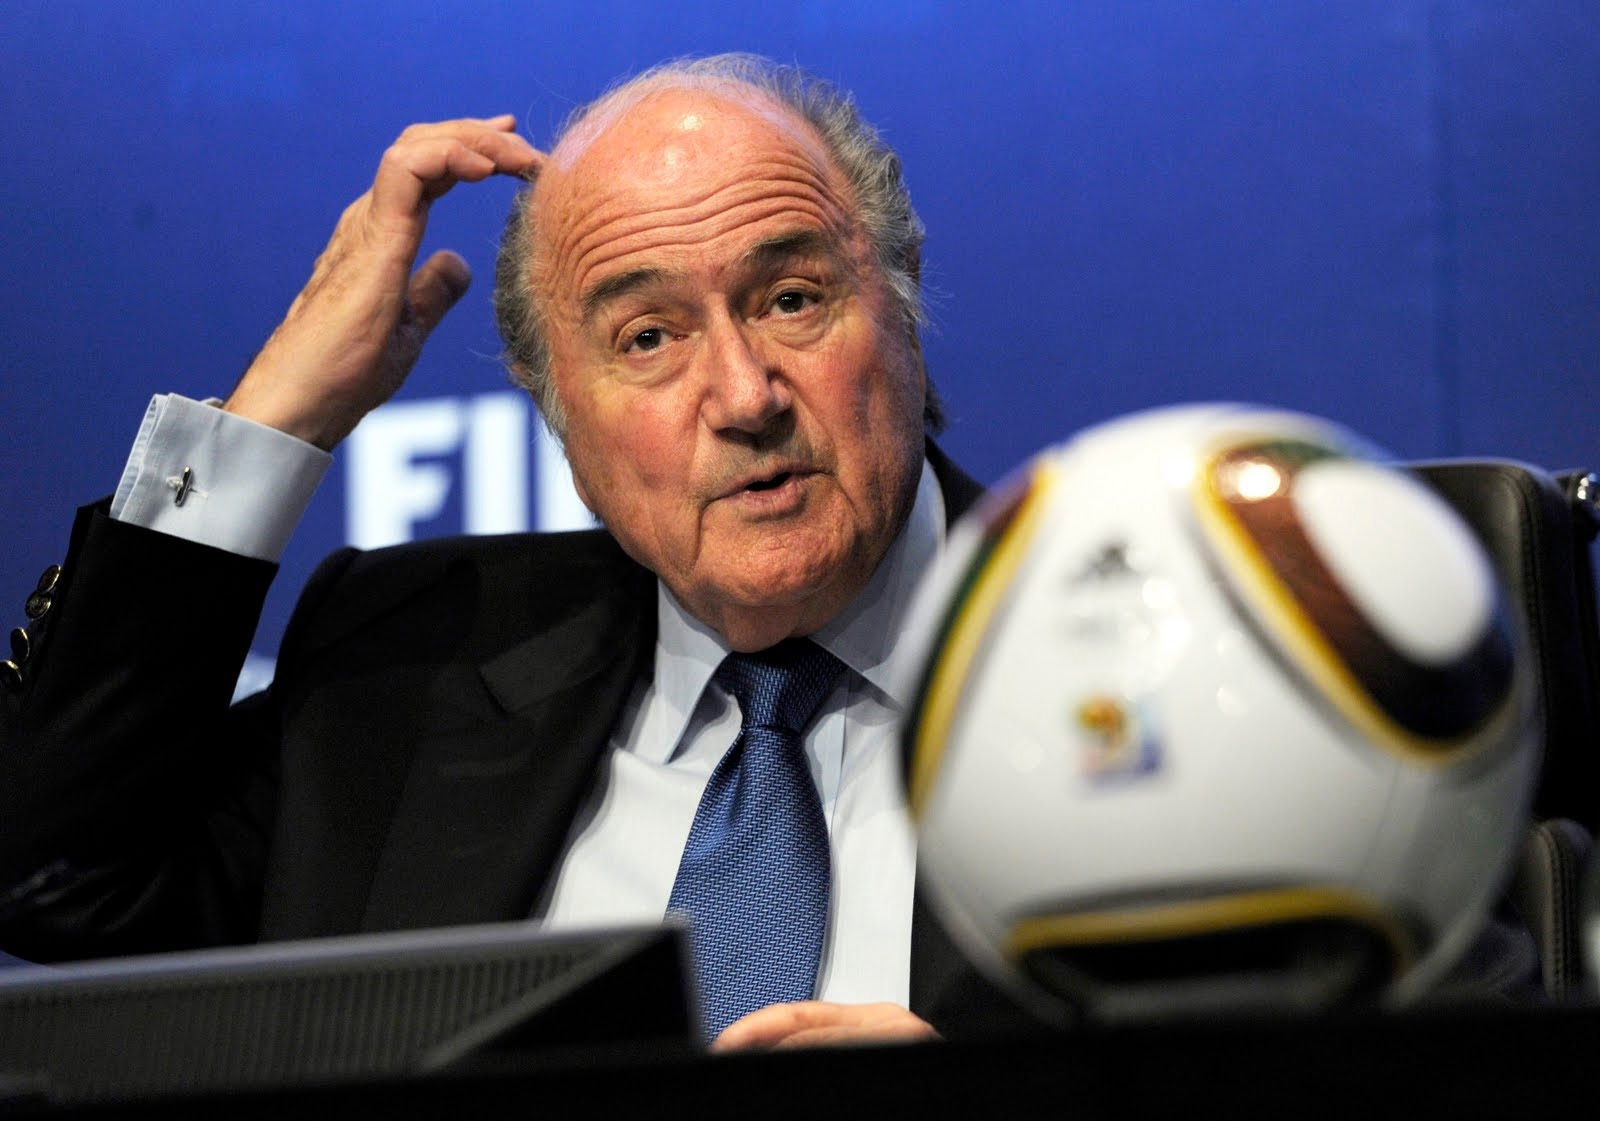 Fifa and Sepp Blatter in secret talks about president's future